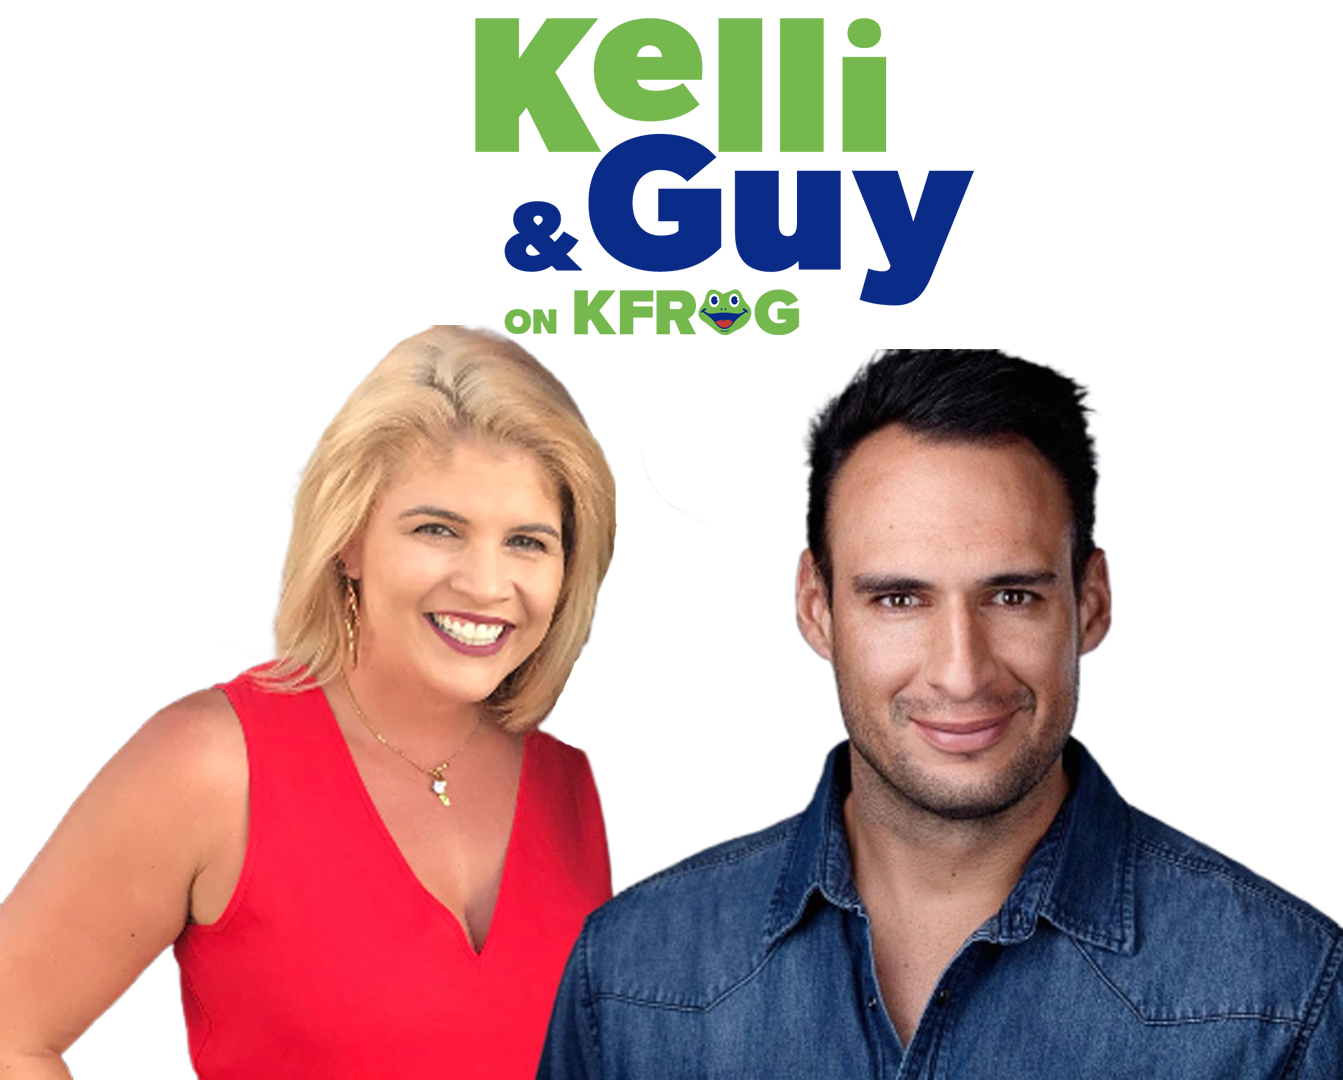 Listen to the random places Guy and Kelli have been asked out!